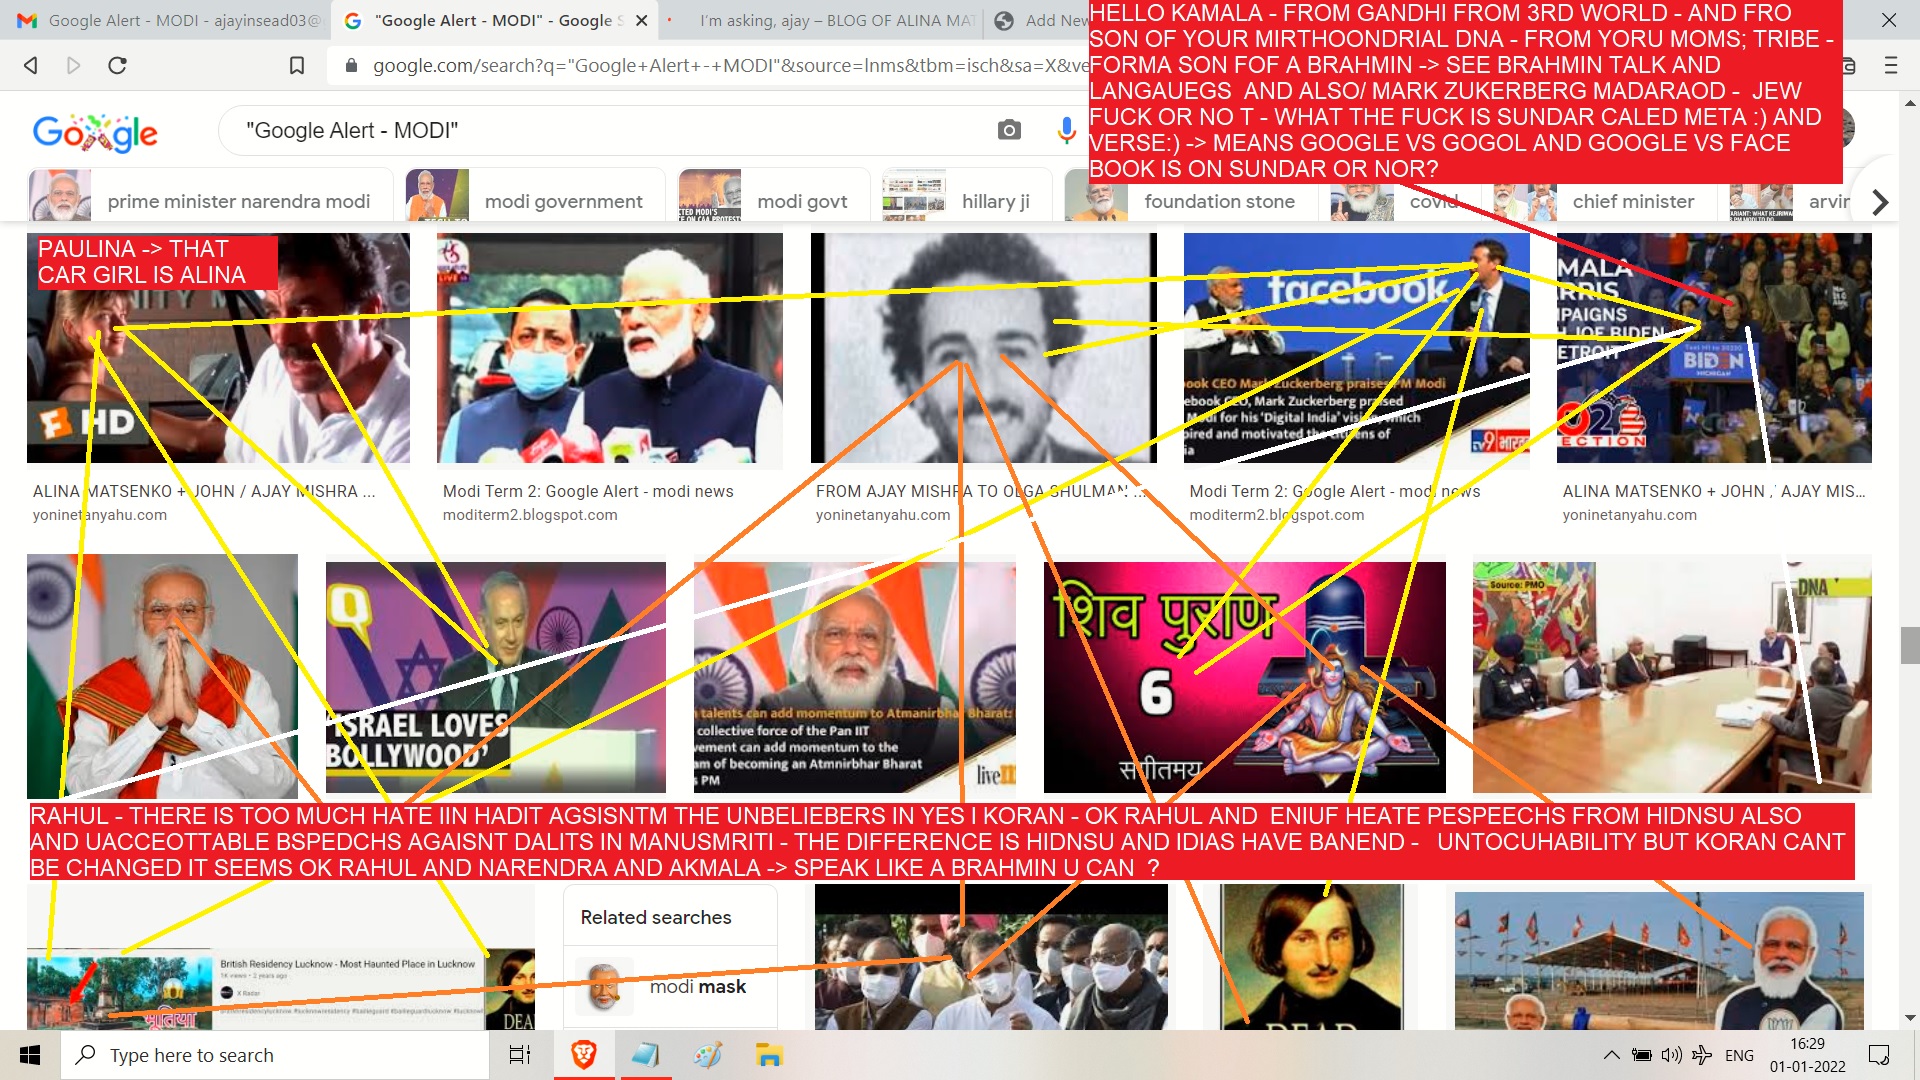 GOOGLE ALERT MODI HAPPY NEAY TYERA RAHUL GANDHI SIR AND MODI JI AND MRSSONIA GANDHI AD MSULIMS ALSO NOTJUST TO BRAHMIAND JEWS ONLY BUT END OWSIS AND KAHSN HATEED -- .-----